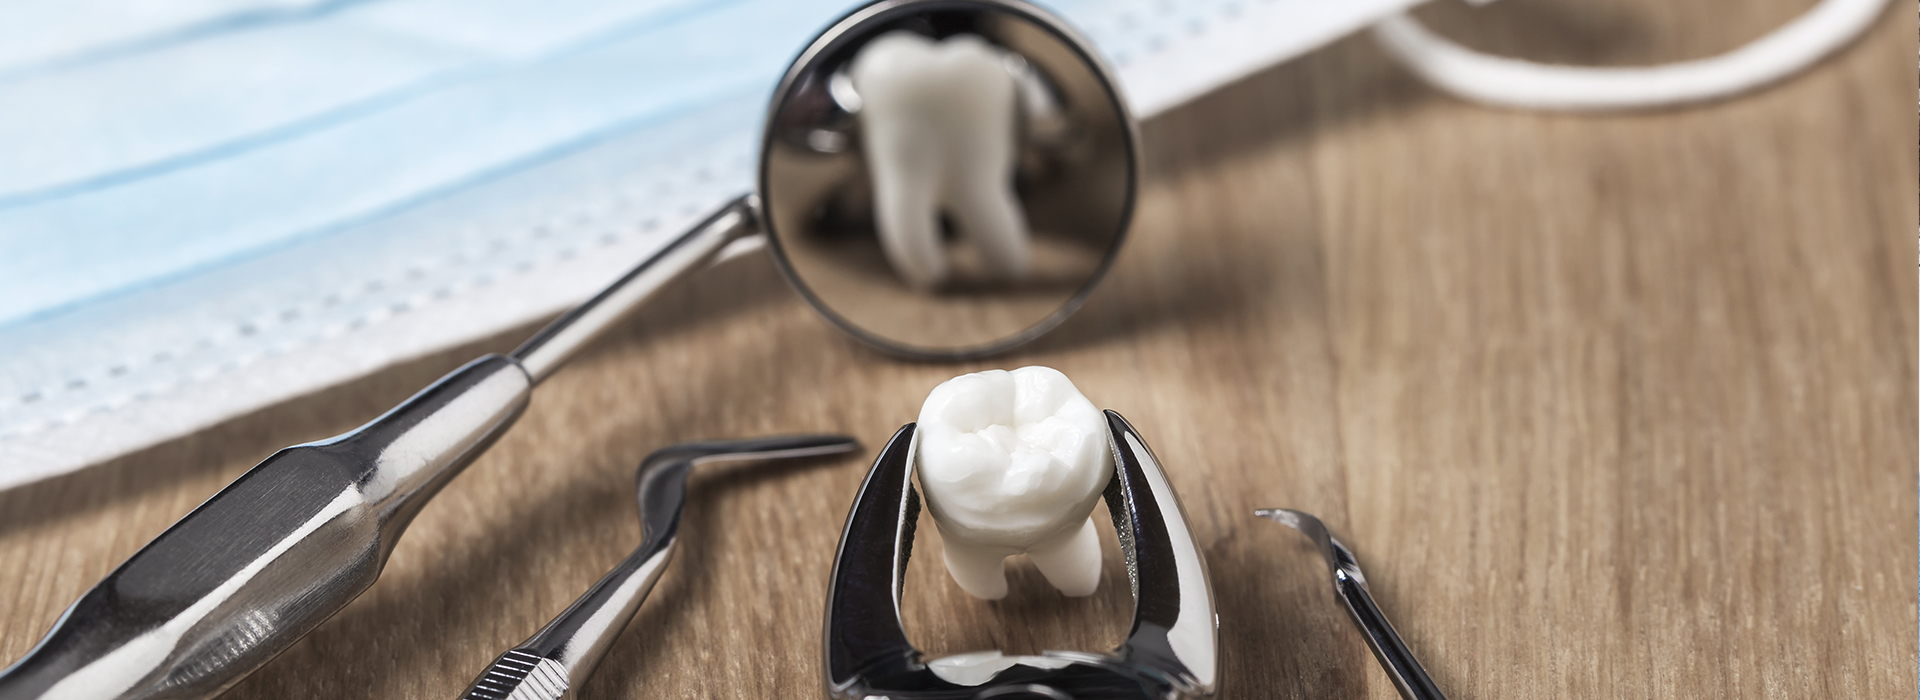 Modern Dental Care of Queens | Implant Restorations, Periodontal Treatment and Dental Sealants